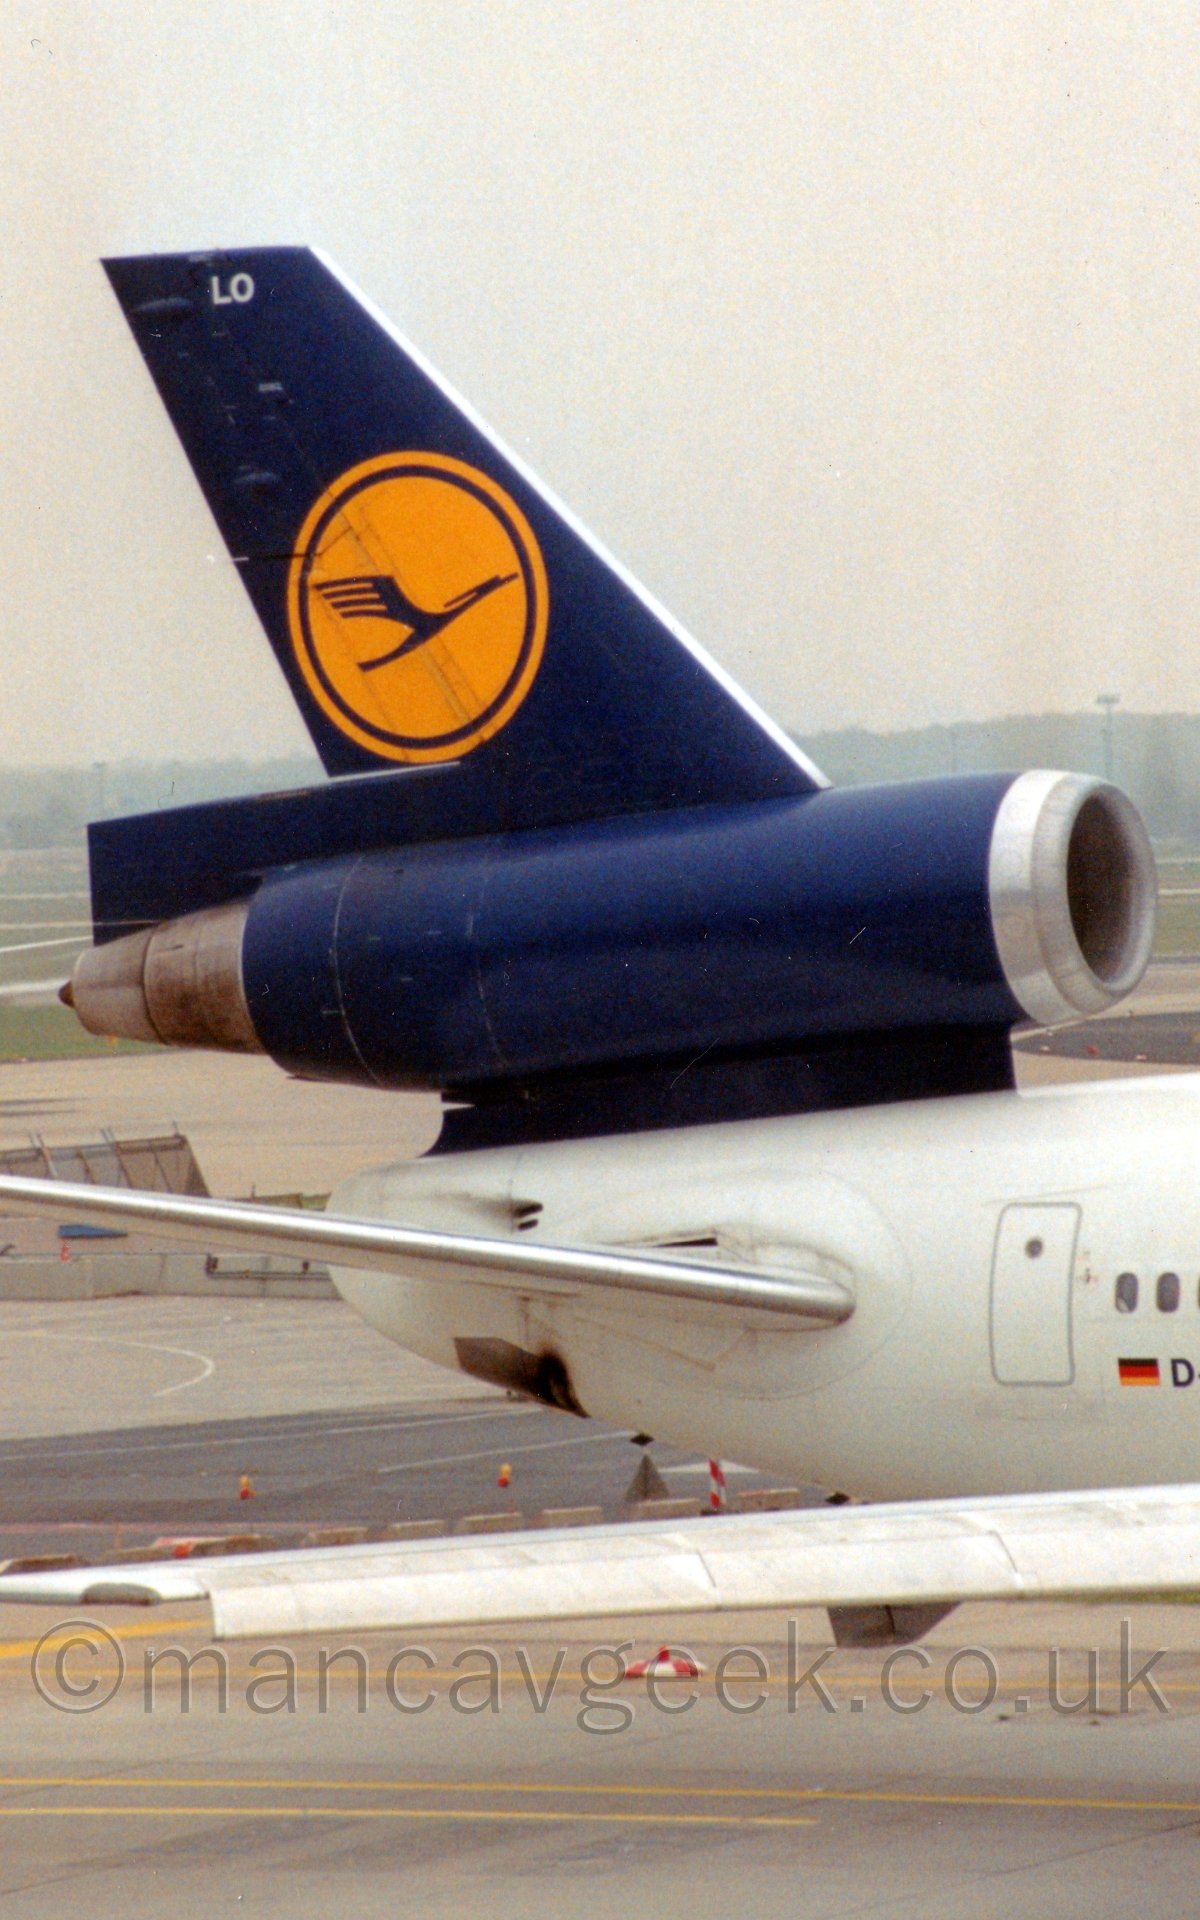 Close up of the blue tail and centre engine of a white 3 engined jet airliner taxiing from left to right, under a hazy white sky.